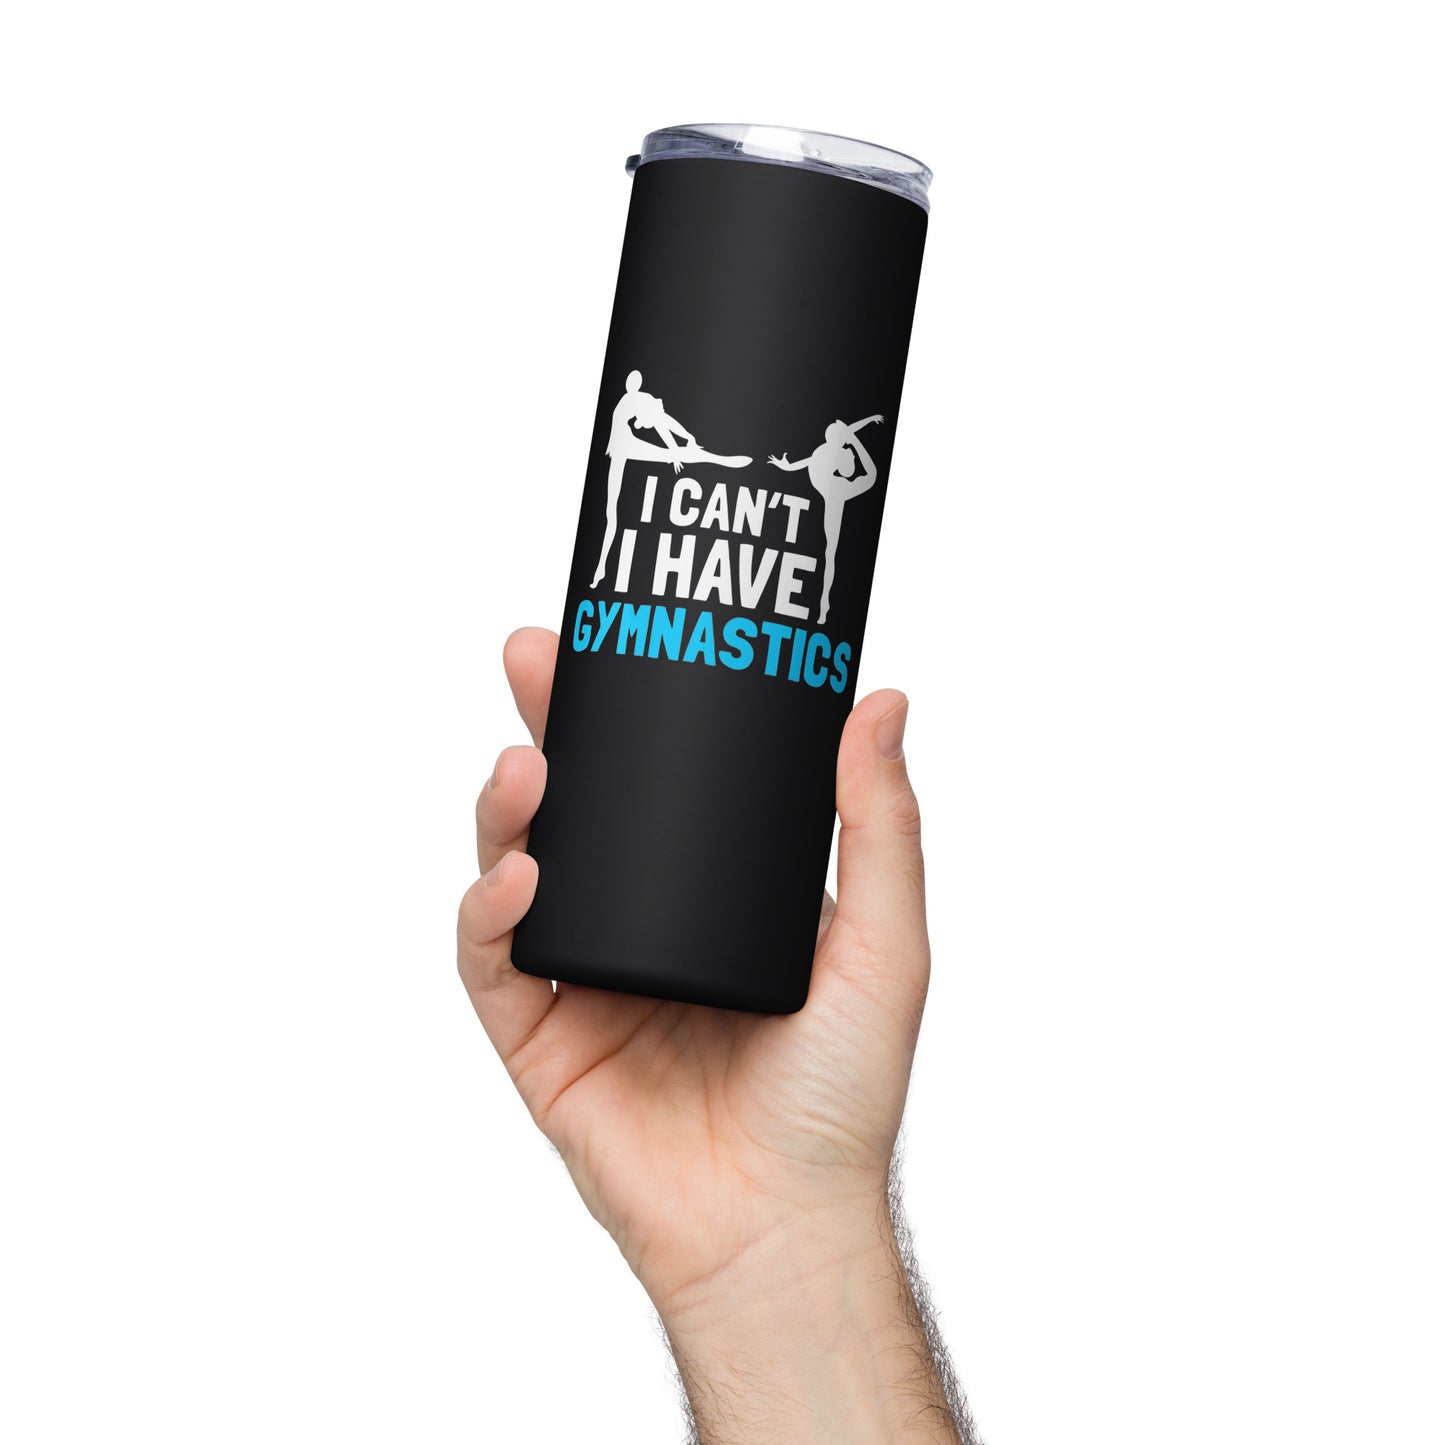 I Can't I Have Gymnastics Stainless steel tumbler